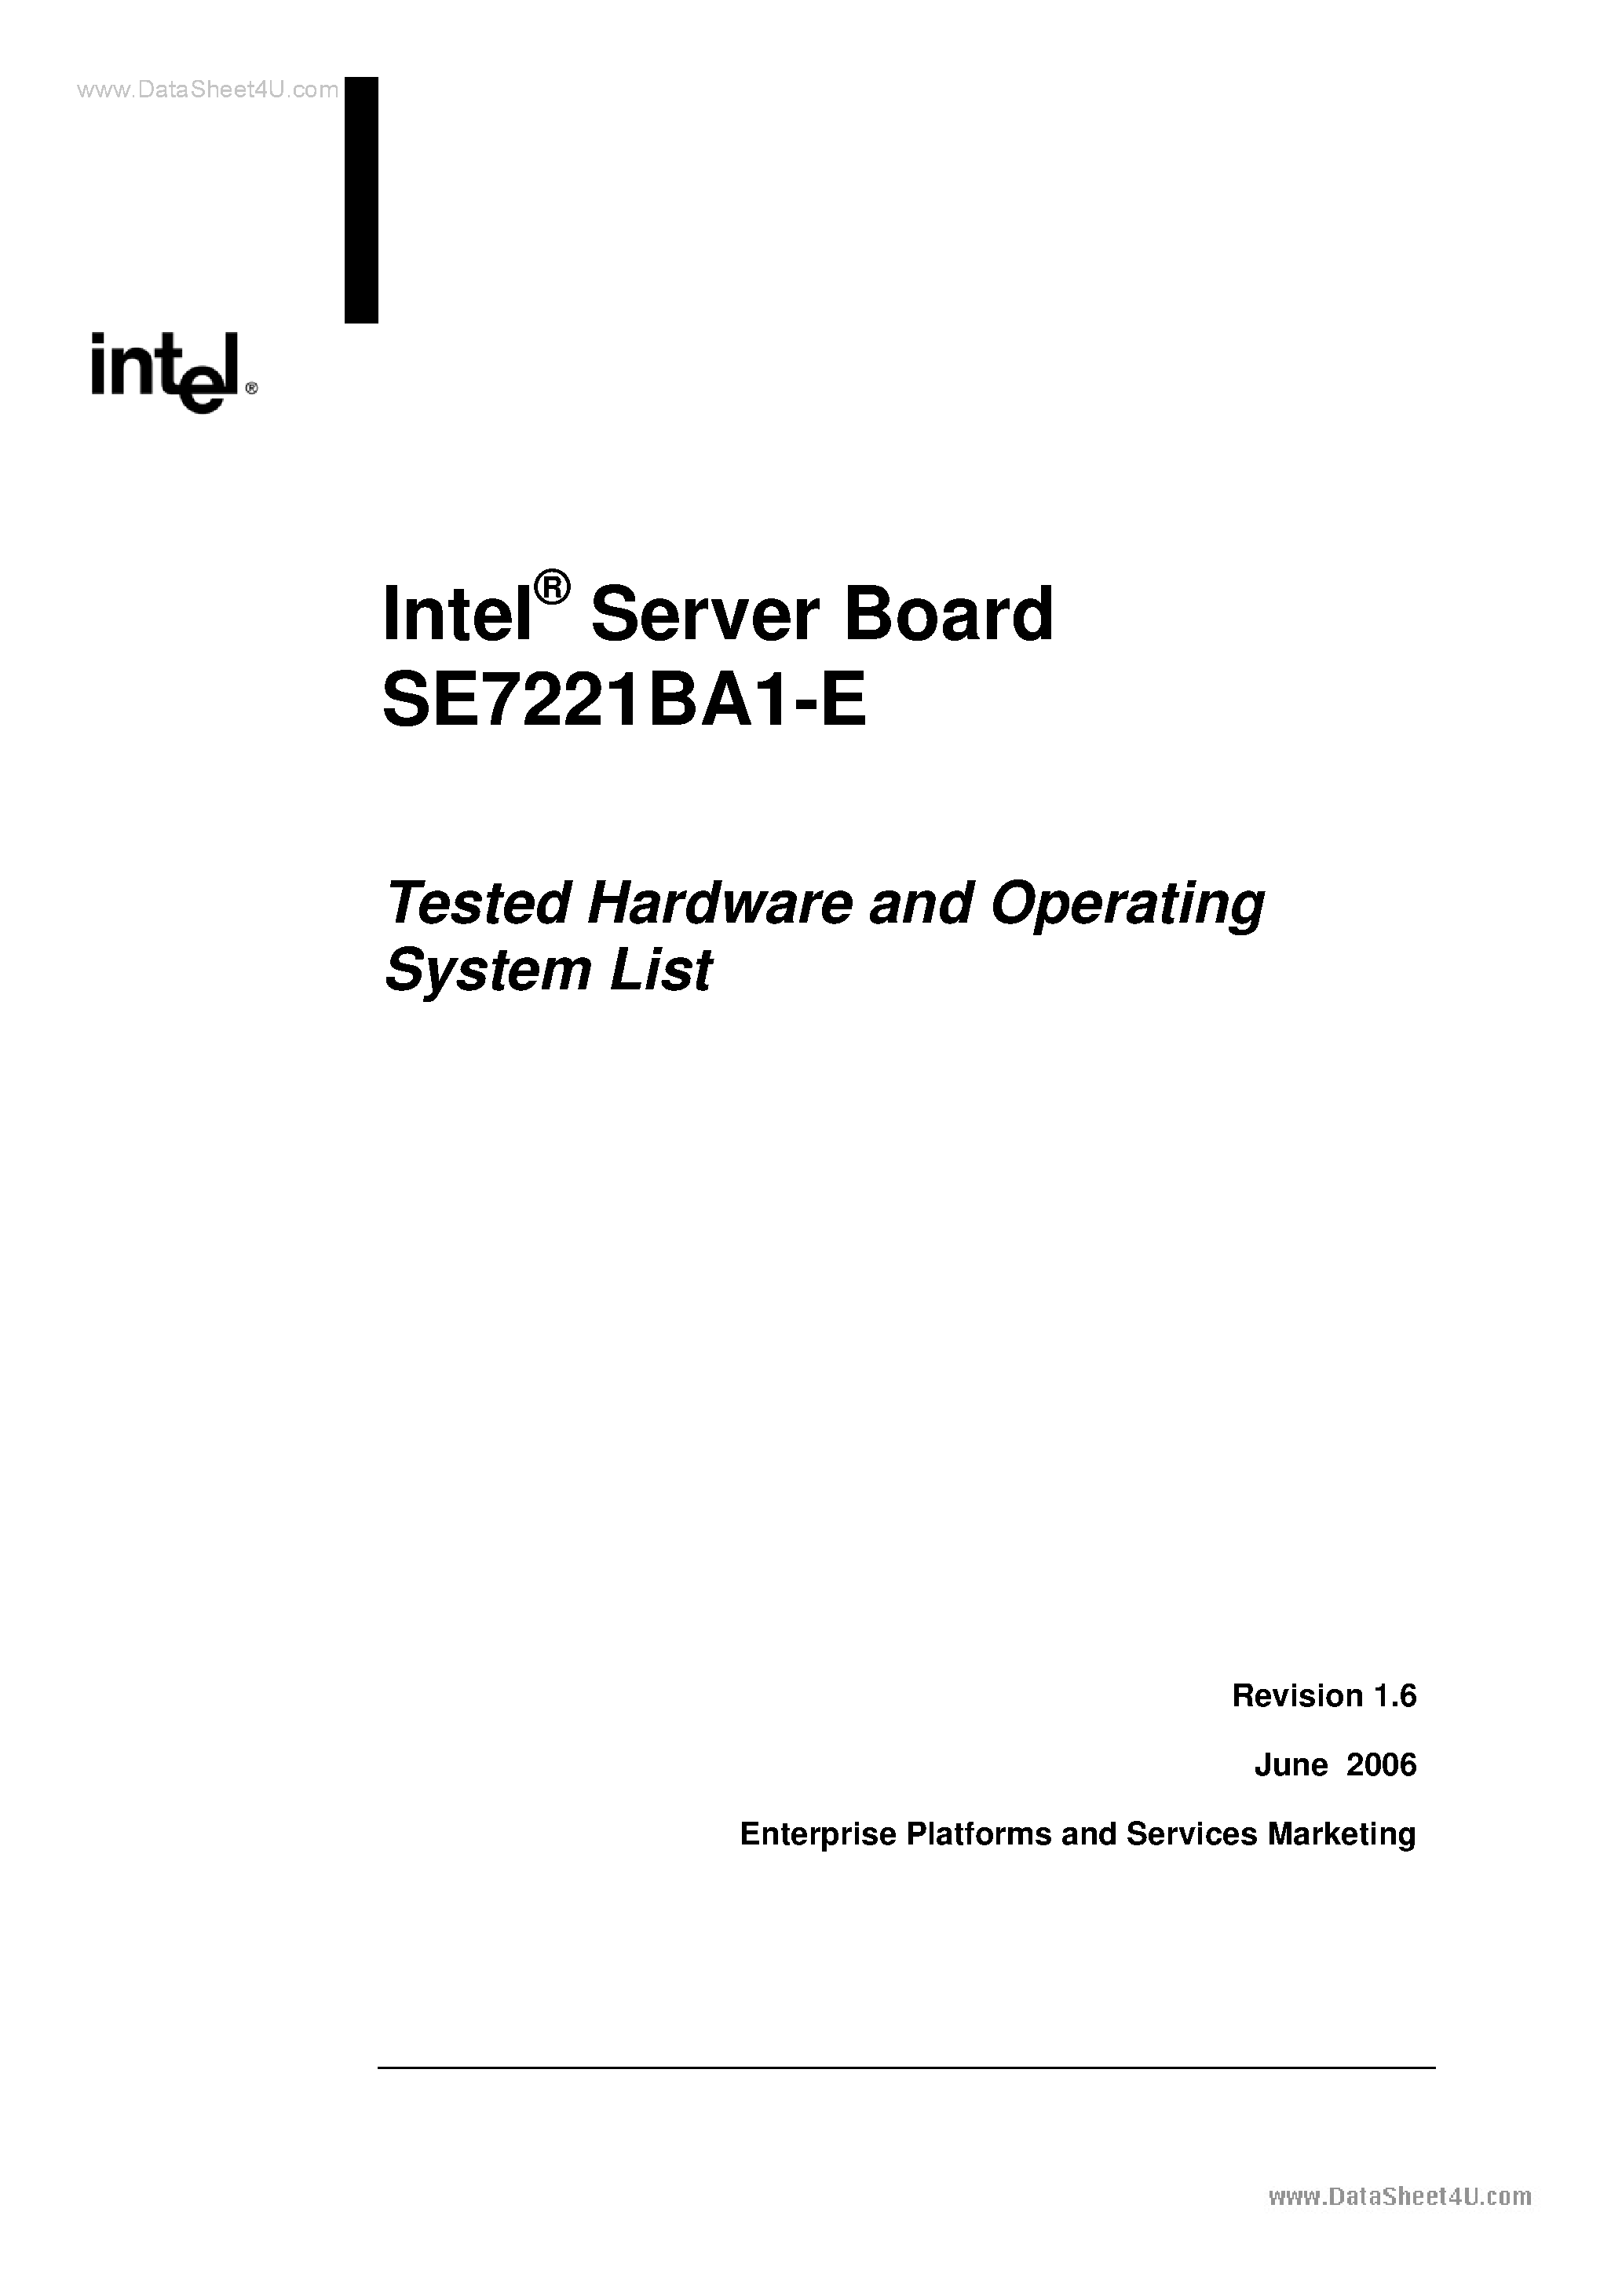 Datasheet SE7221BA1-E - Tested Hardware and Operating System List page 1